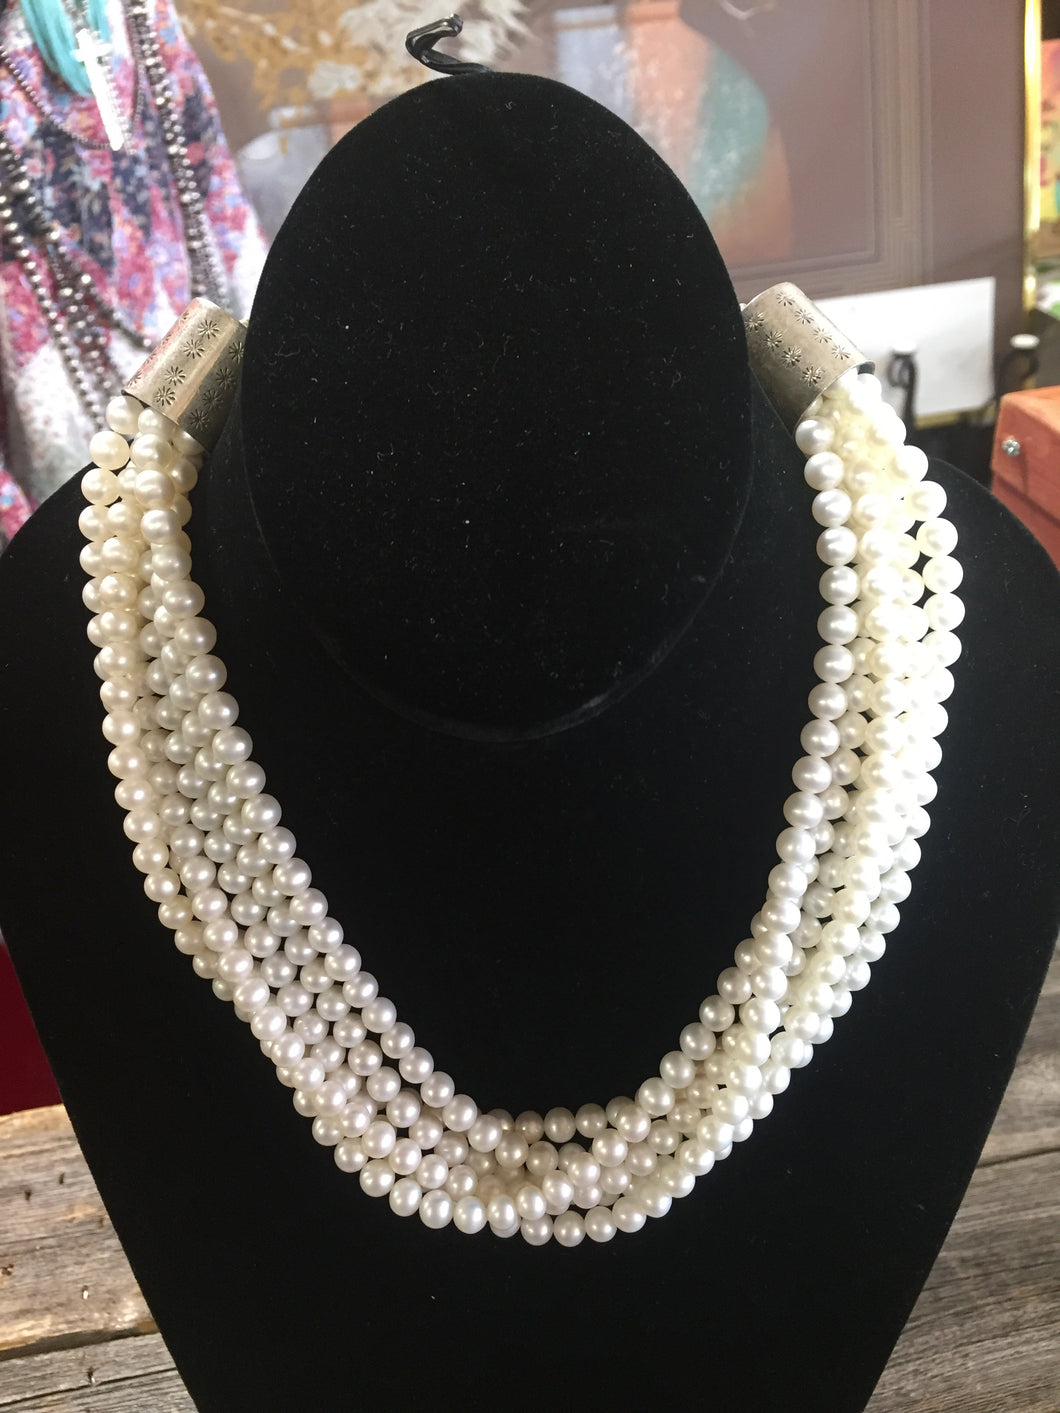 6 stand fresh water Pearls